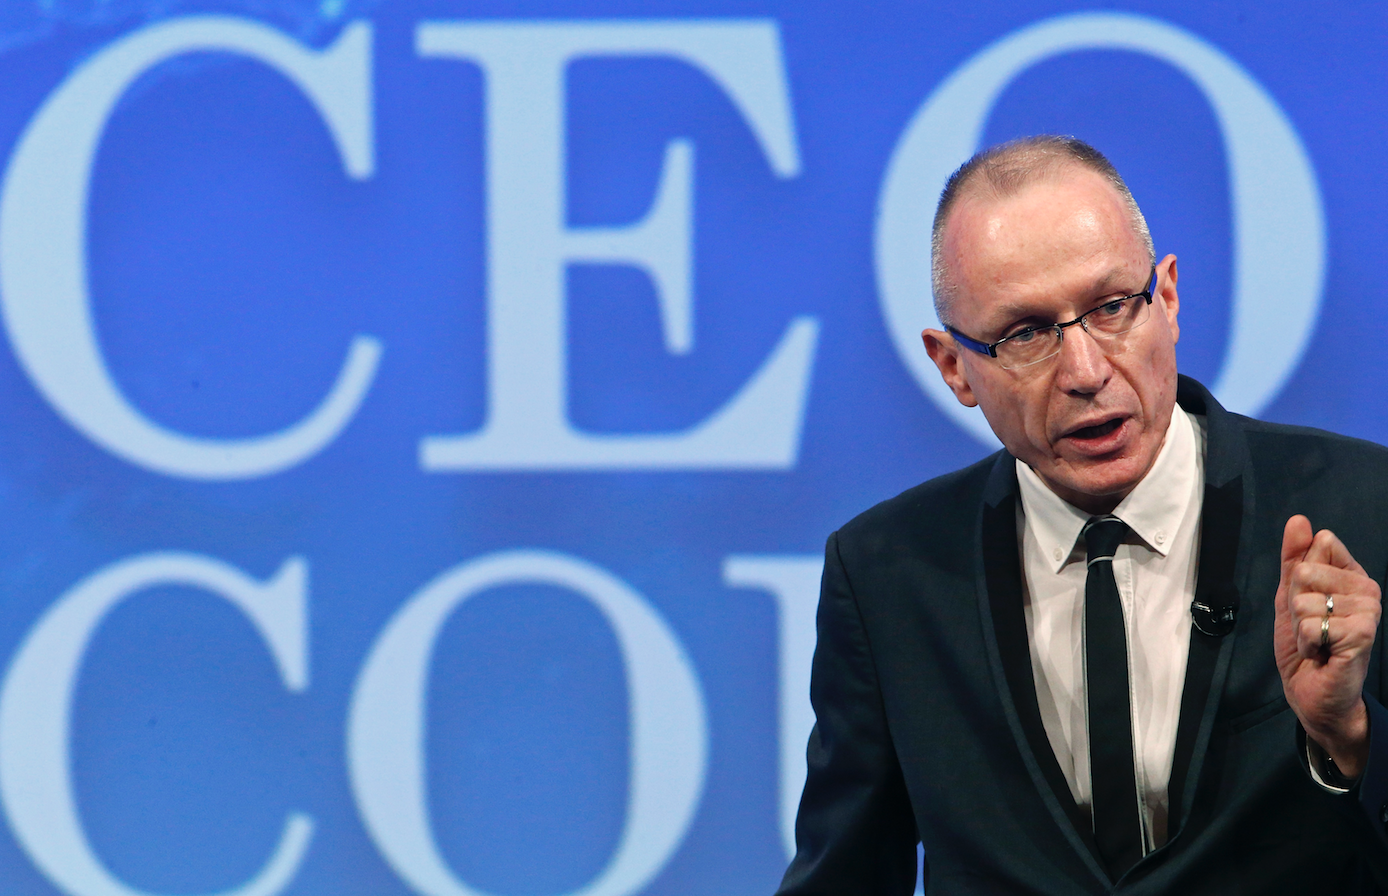 Robert Thomson: News Corp's Google deal will give journalism industry 'second wind'